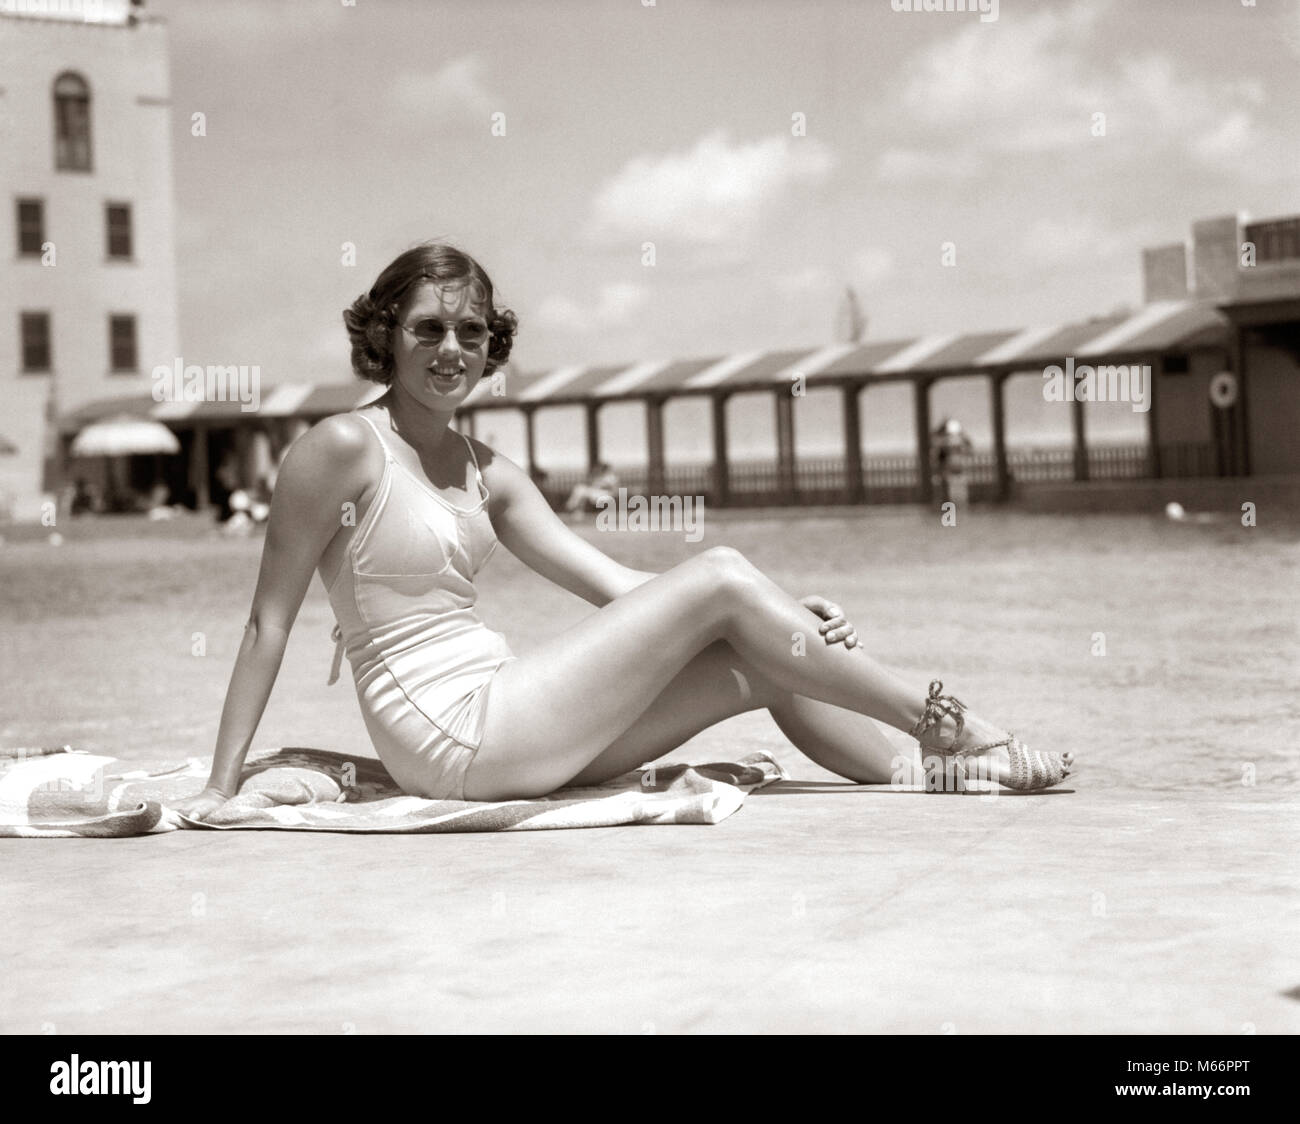 1930s WOMAN SITTING POOL SIDE LOOKING AT CAMERA WEARING FASHIONABLE SUNGLASSES BATHING SUIT AND SANDALS MIAMI BEACH FLORIDA USA - s9100 HAR001 HARS STYLE TROPICAL BATHING YOUNG ADULT VACATION CAUCASIAN WEAR LIFESTYLE FEMALES SWIM GROWNUP ONE PERSON ONLY UNITED STATES COPY SPACE FULL-LENGTH LADIES GROWN-UP UNITED STATES OF AMERICA NOSTALGIA NORTH AMERICA EYE CONTACT NORTH AMERICAN OCCUPATION URBAN CENTER SWIMMING POOL LEISURE RELAXATION RECREATION WATER RECREATION SOUTHEAST OCCASION POSING SOUTHERN EAST COAST SANDY POOL SIDE GULF COAST SWIM WEAR FL MODELING POOL-SIDE SANDALS YOUNG ADULT WOMAN Stock Photo